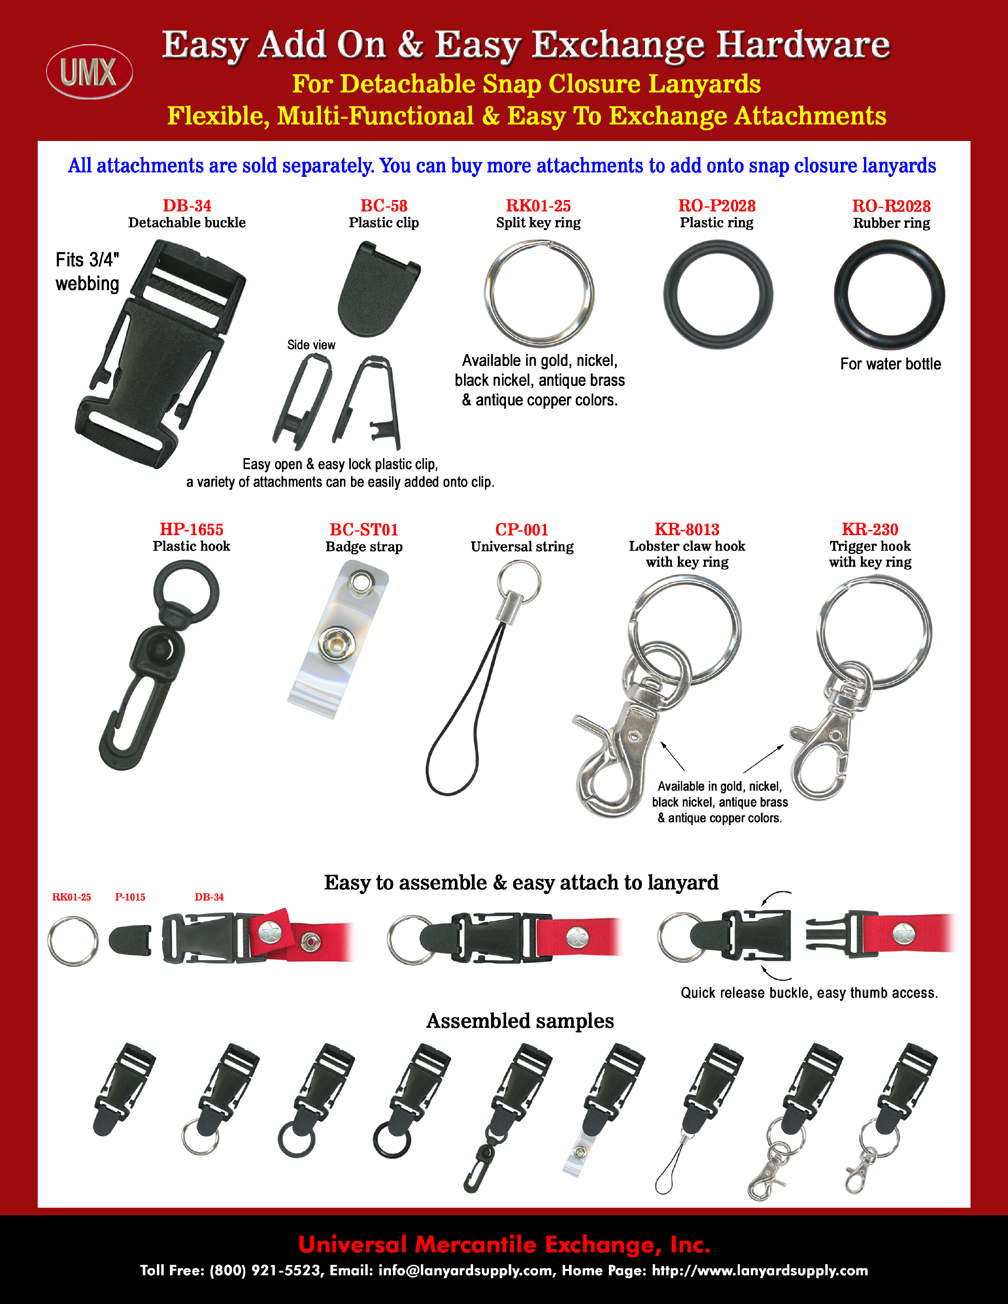 Great Selection of Lanyard Hardware Attachments With Quick Release Capability.